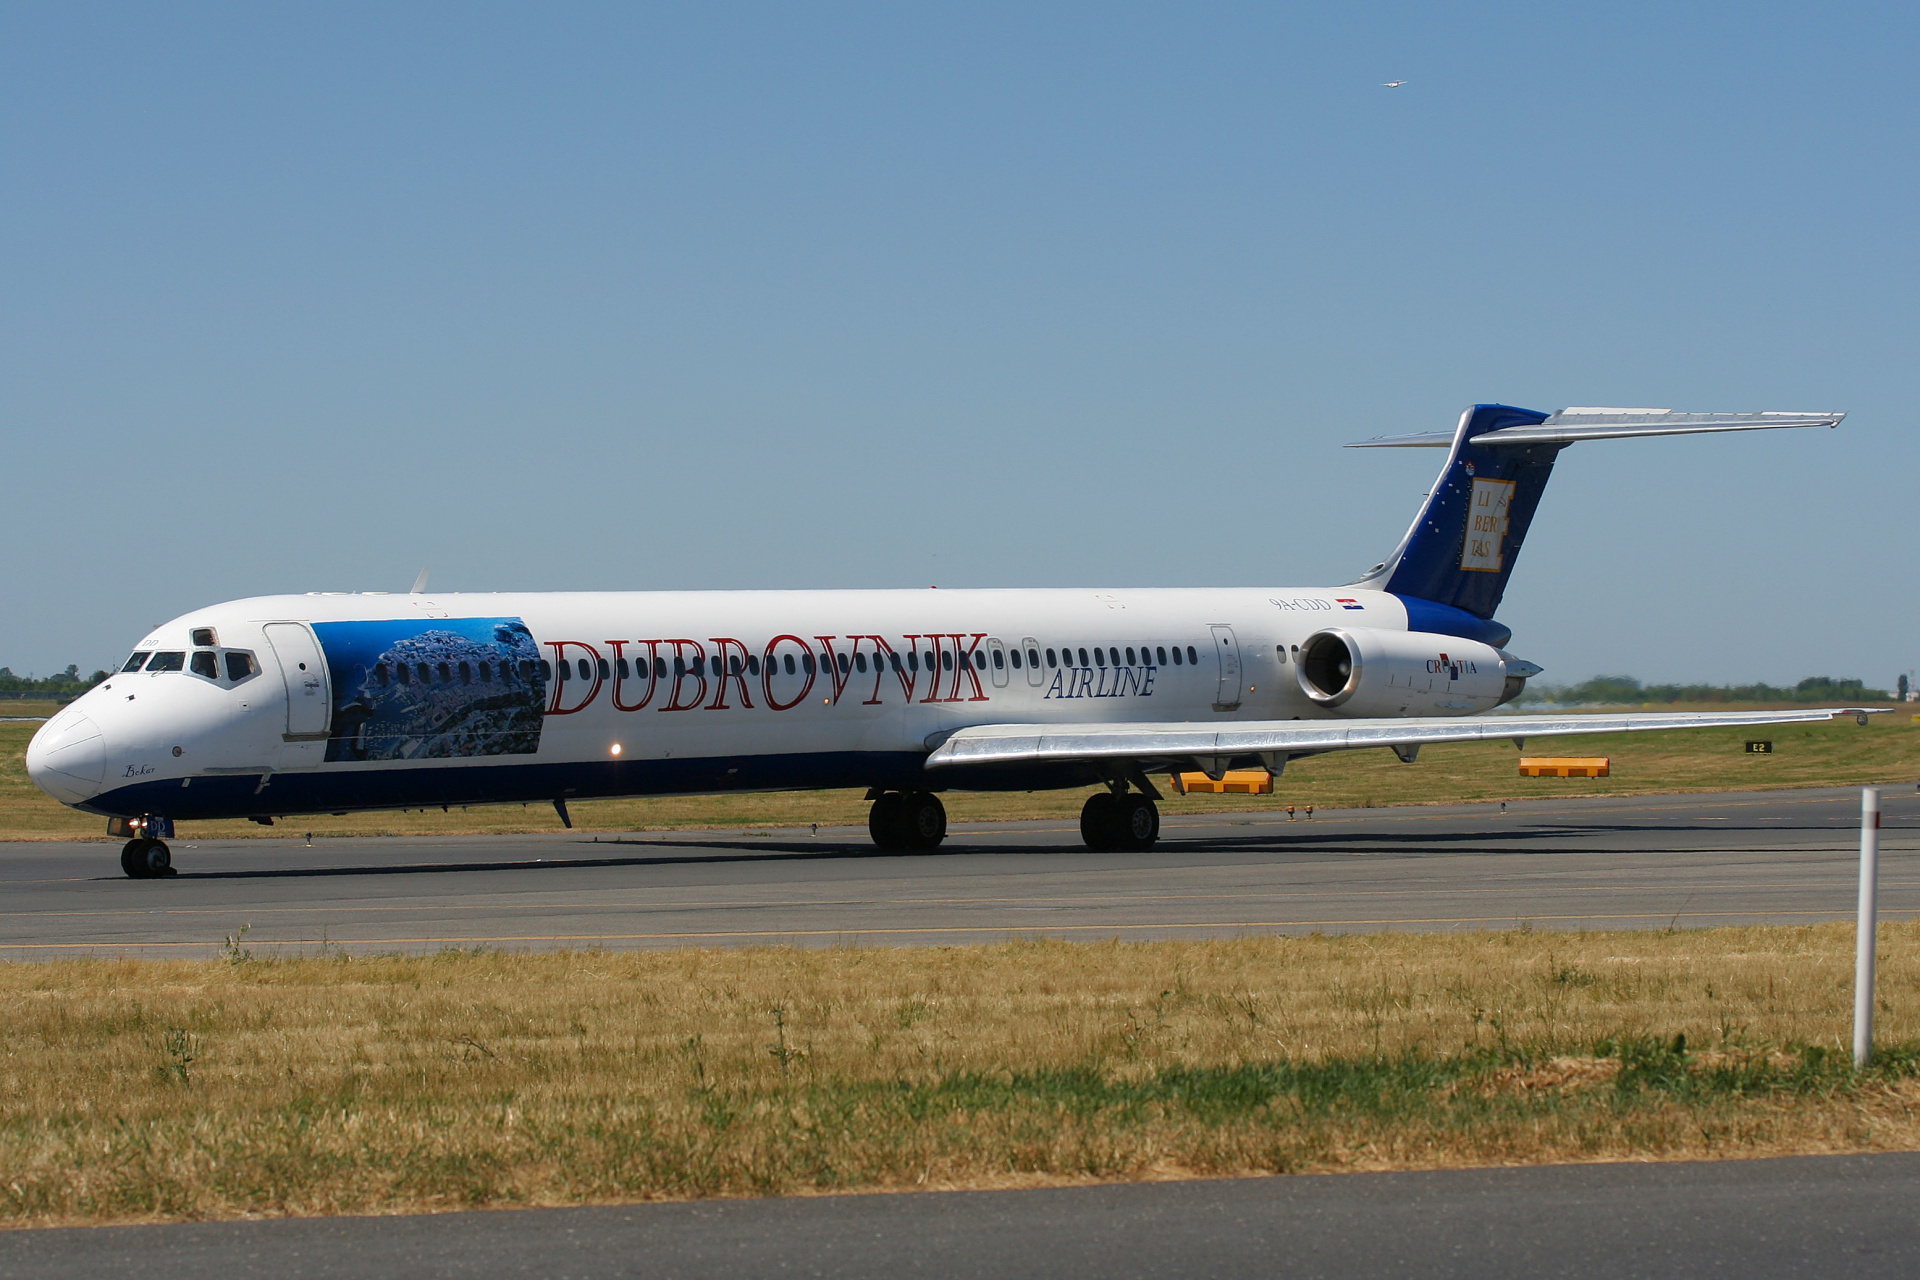 9A-CDD, Dubrovnik Airline (Aircraft » EPWA Spotting » McDonnell Douglas MD-82)